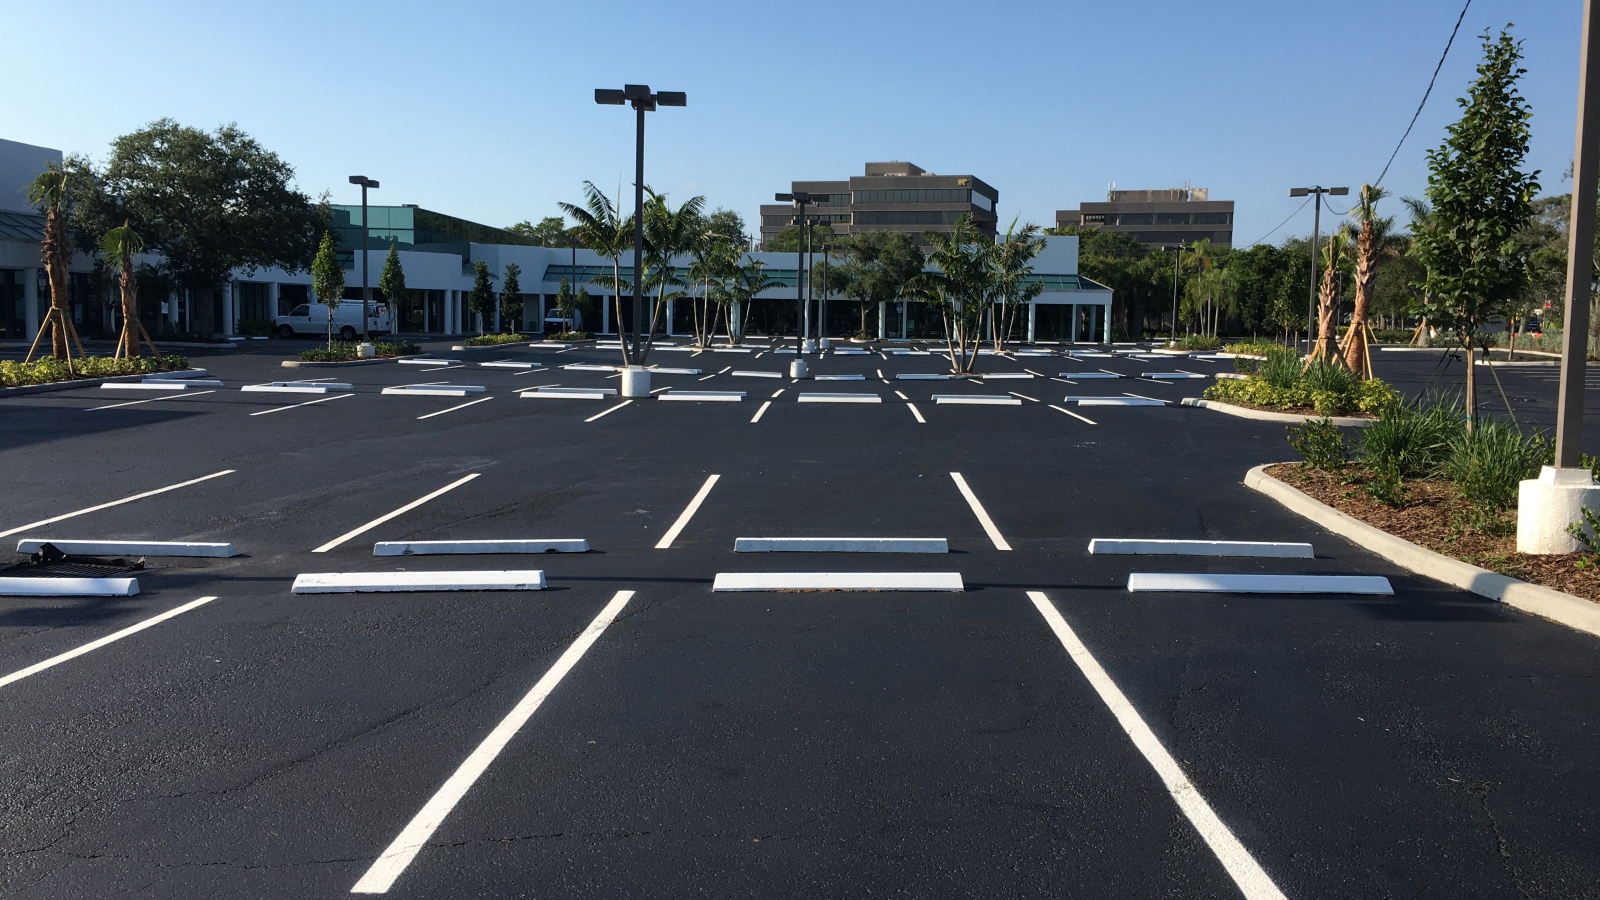 Parking lot spaces with thermoplastic paint